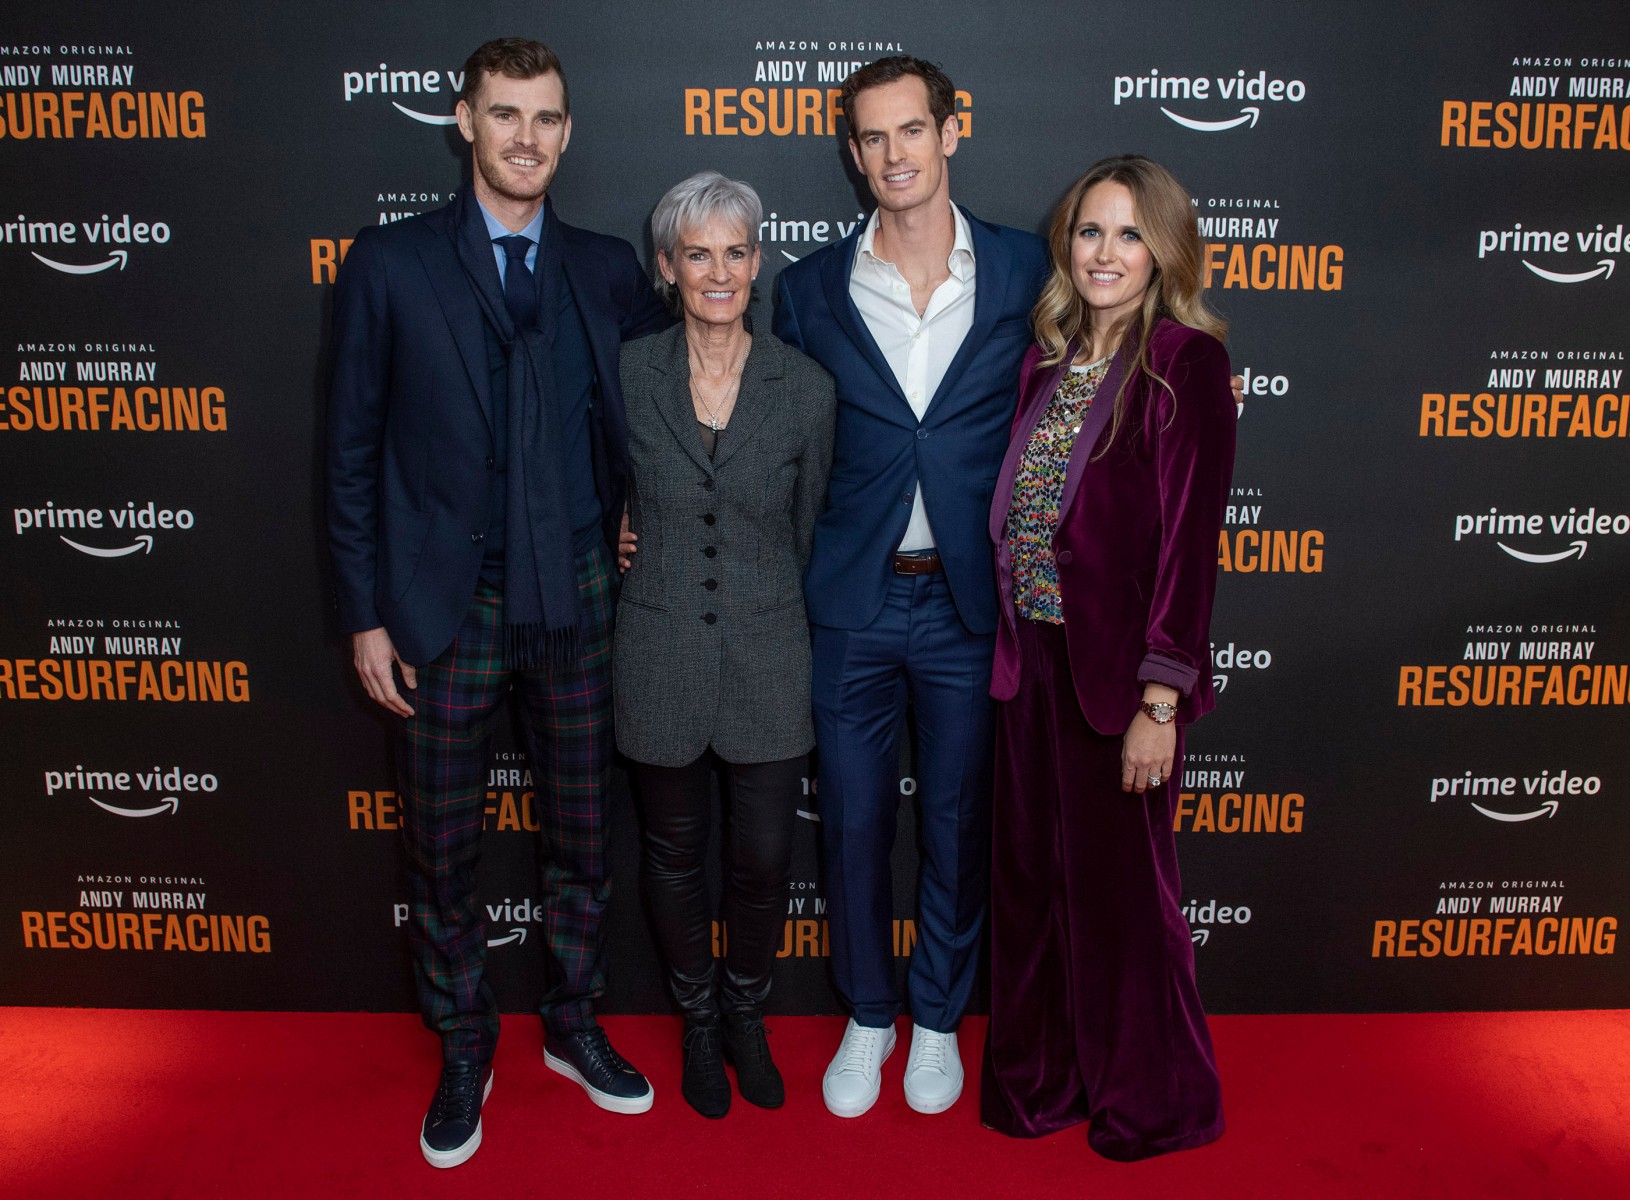 Murray was joined by brother Jamie, mum Judy and wife Kim at the world premiere of the documentary last night in London